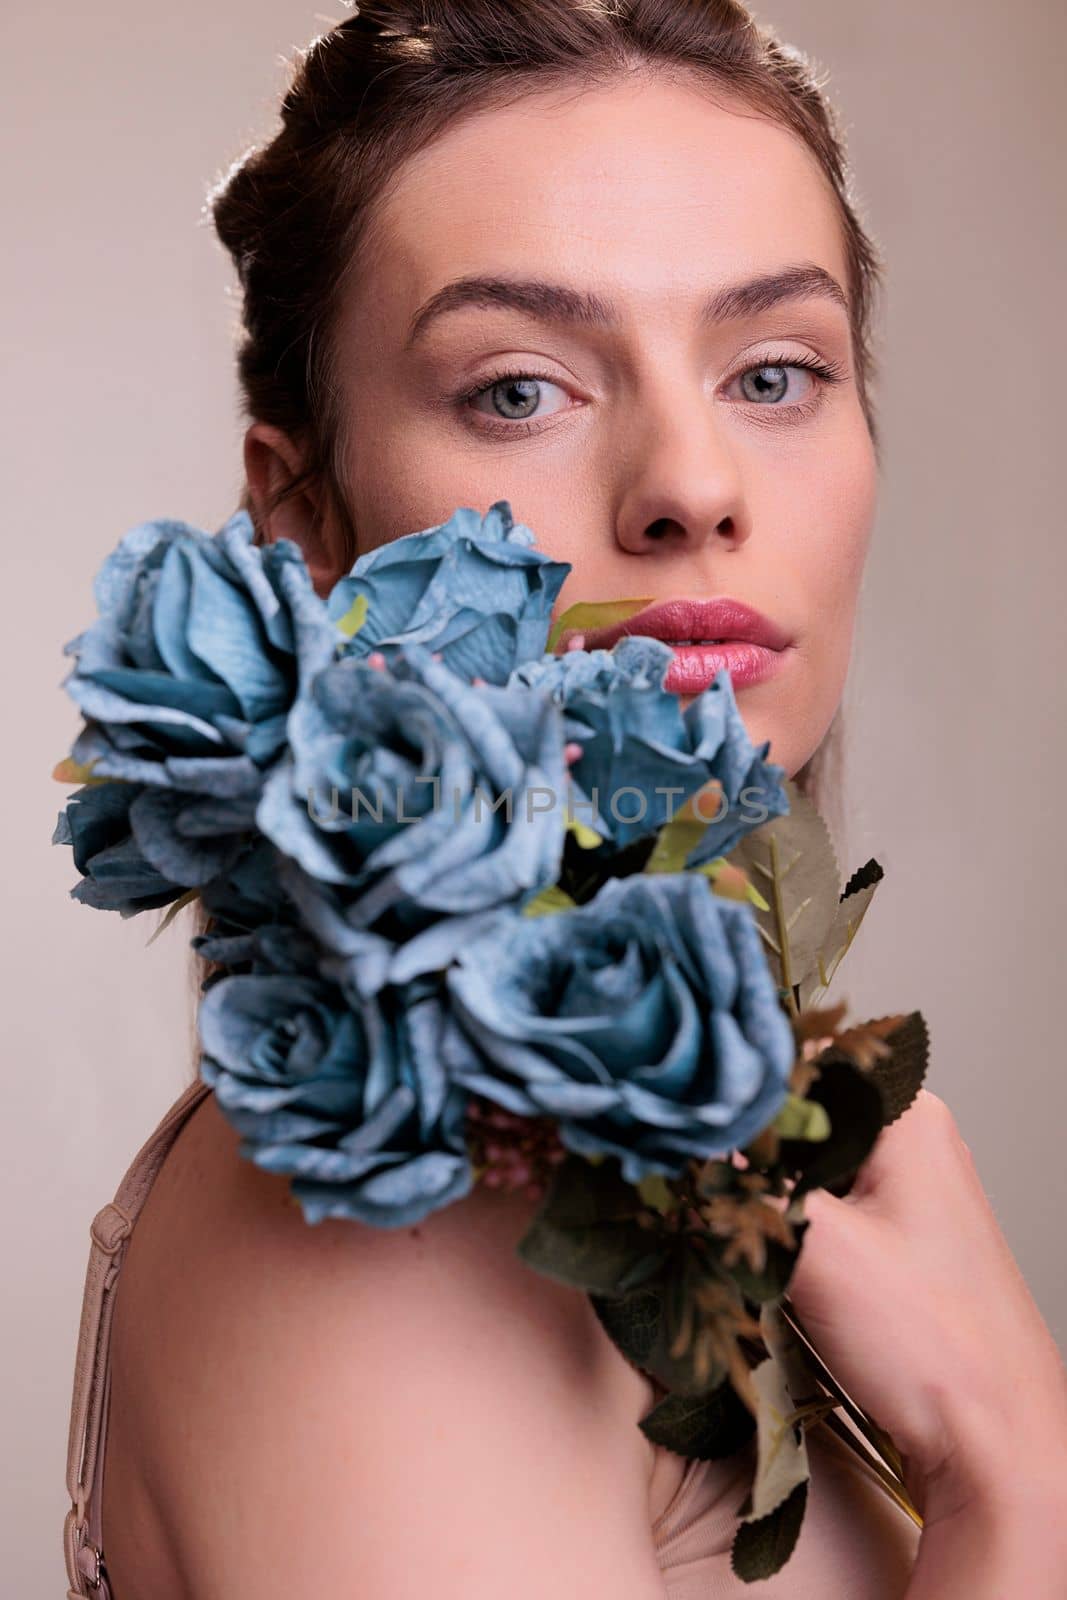 Beautiful woman posing with blue roses bunch on shoulder and looking at camera. Elegant young lady wearing natural make up holding blooming flowers romantic gift in arms close up portrait